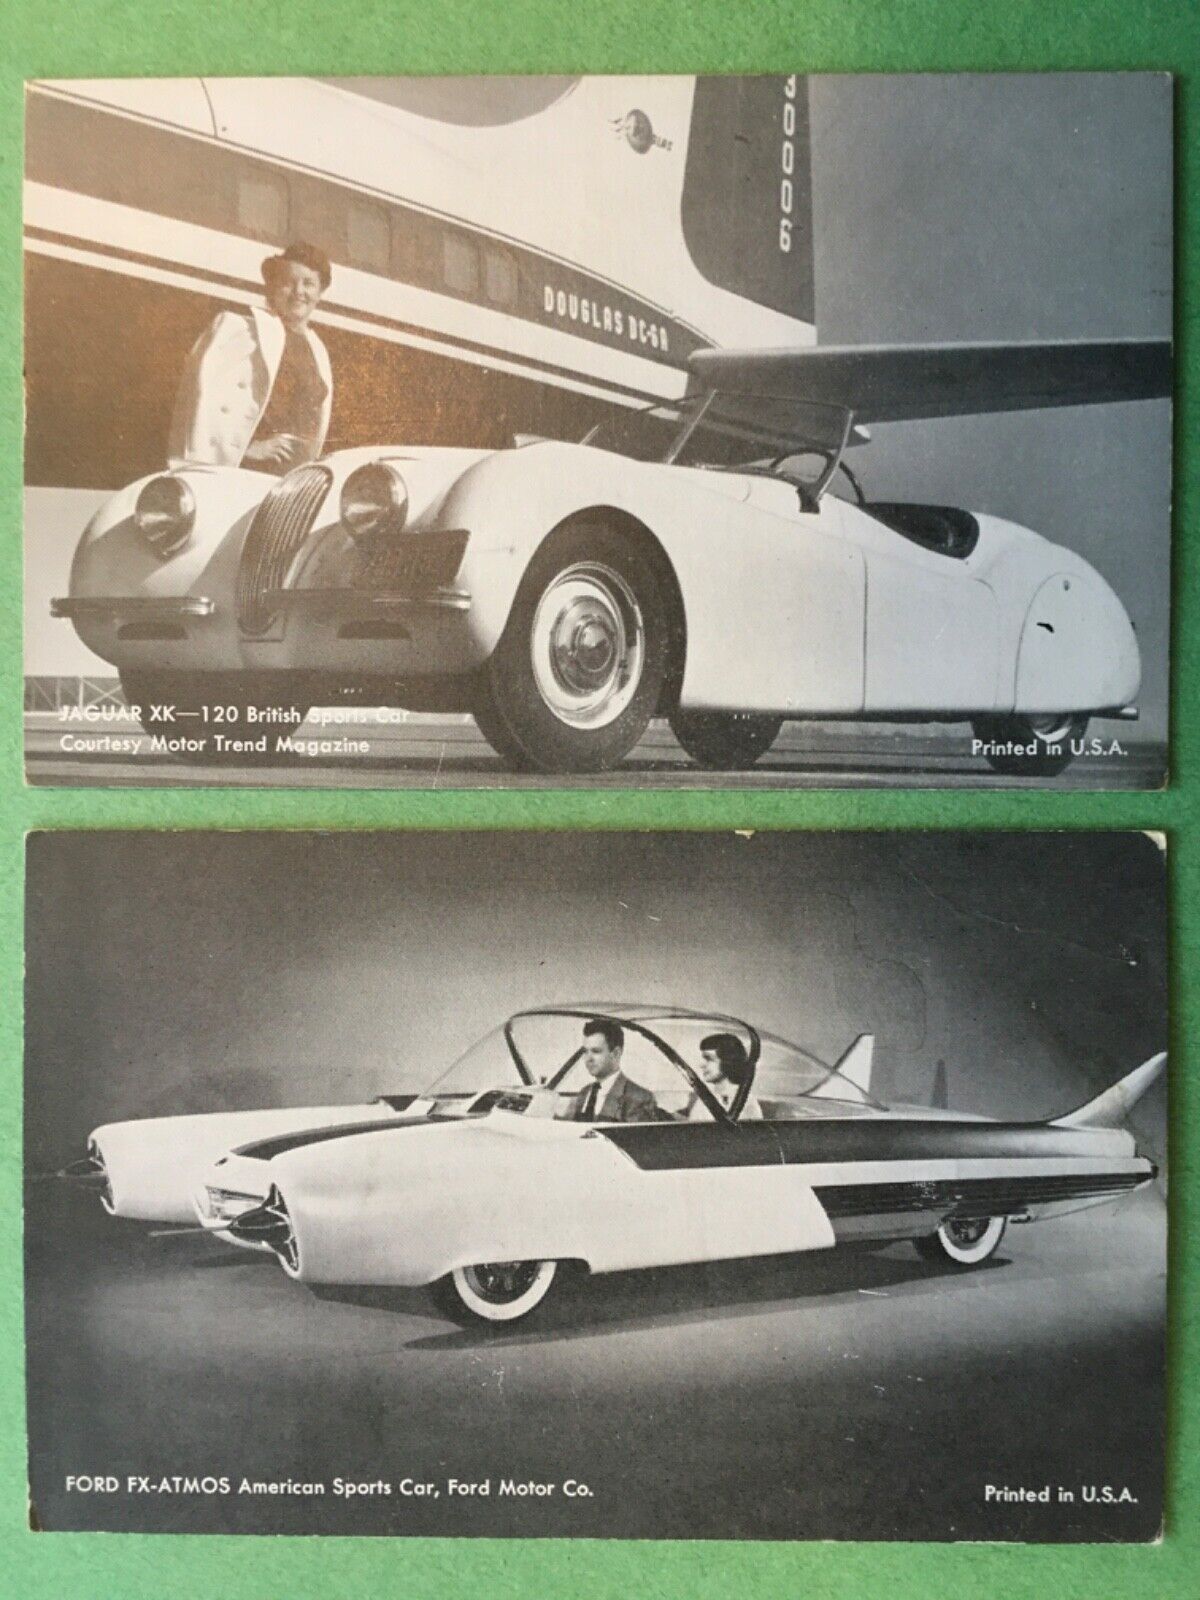 Two Cards, 50s/60’s Jaguar XK-120 and Ford FX-Atmos Exhibit Cards